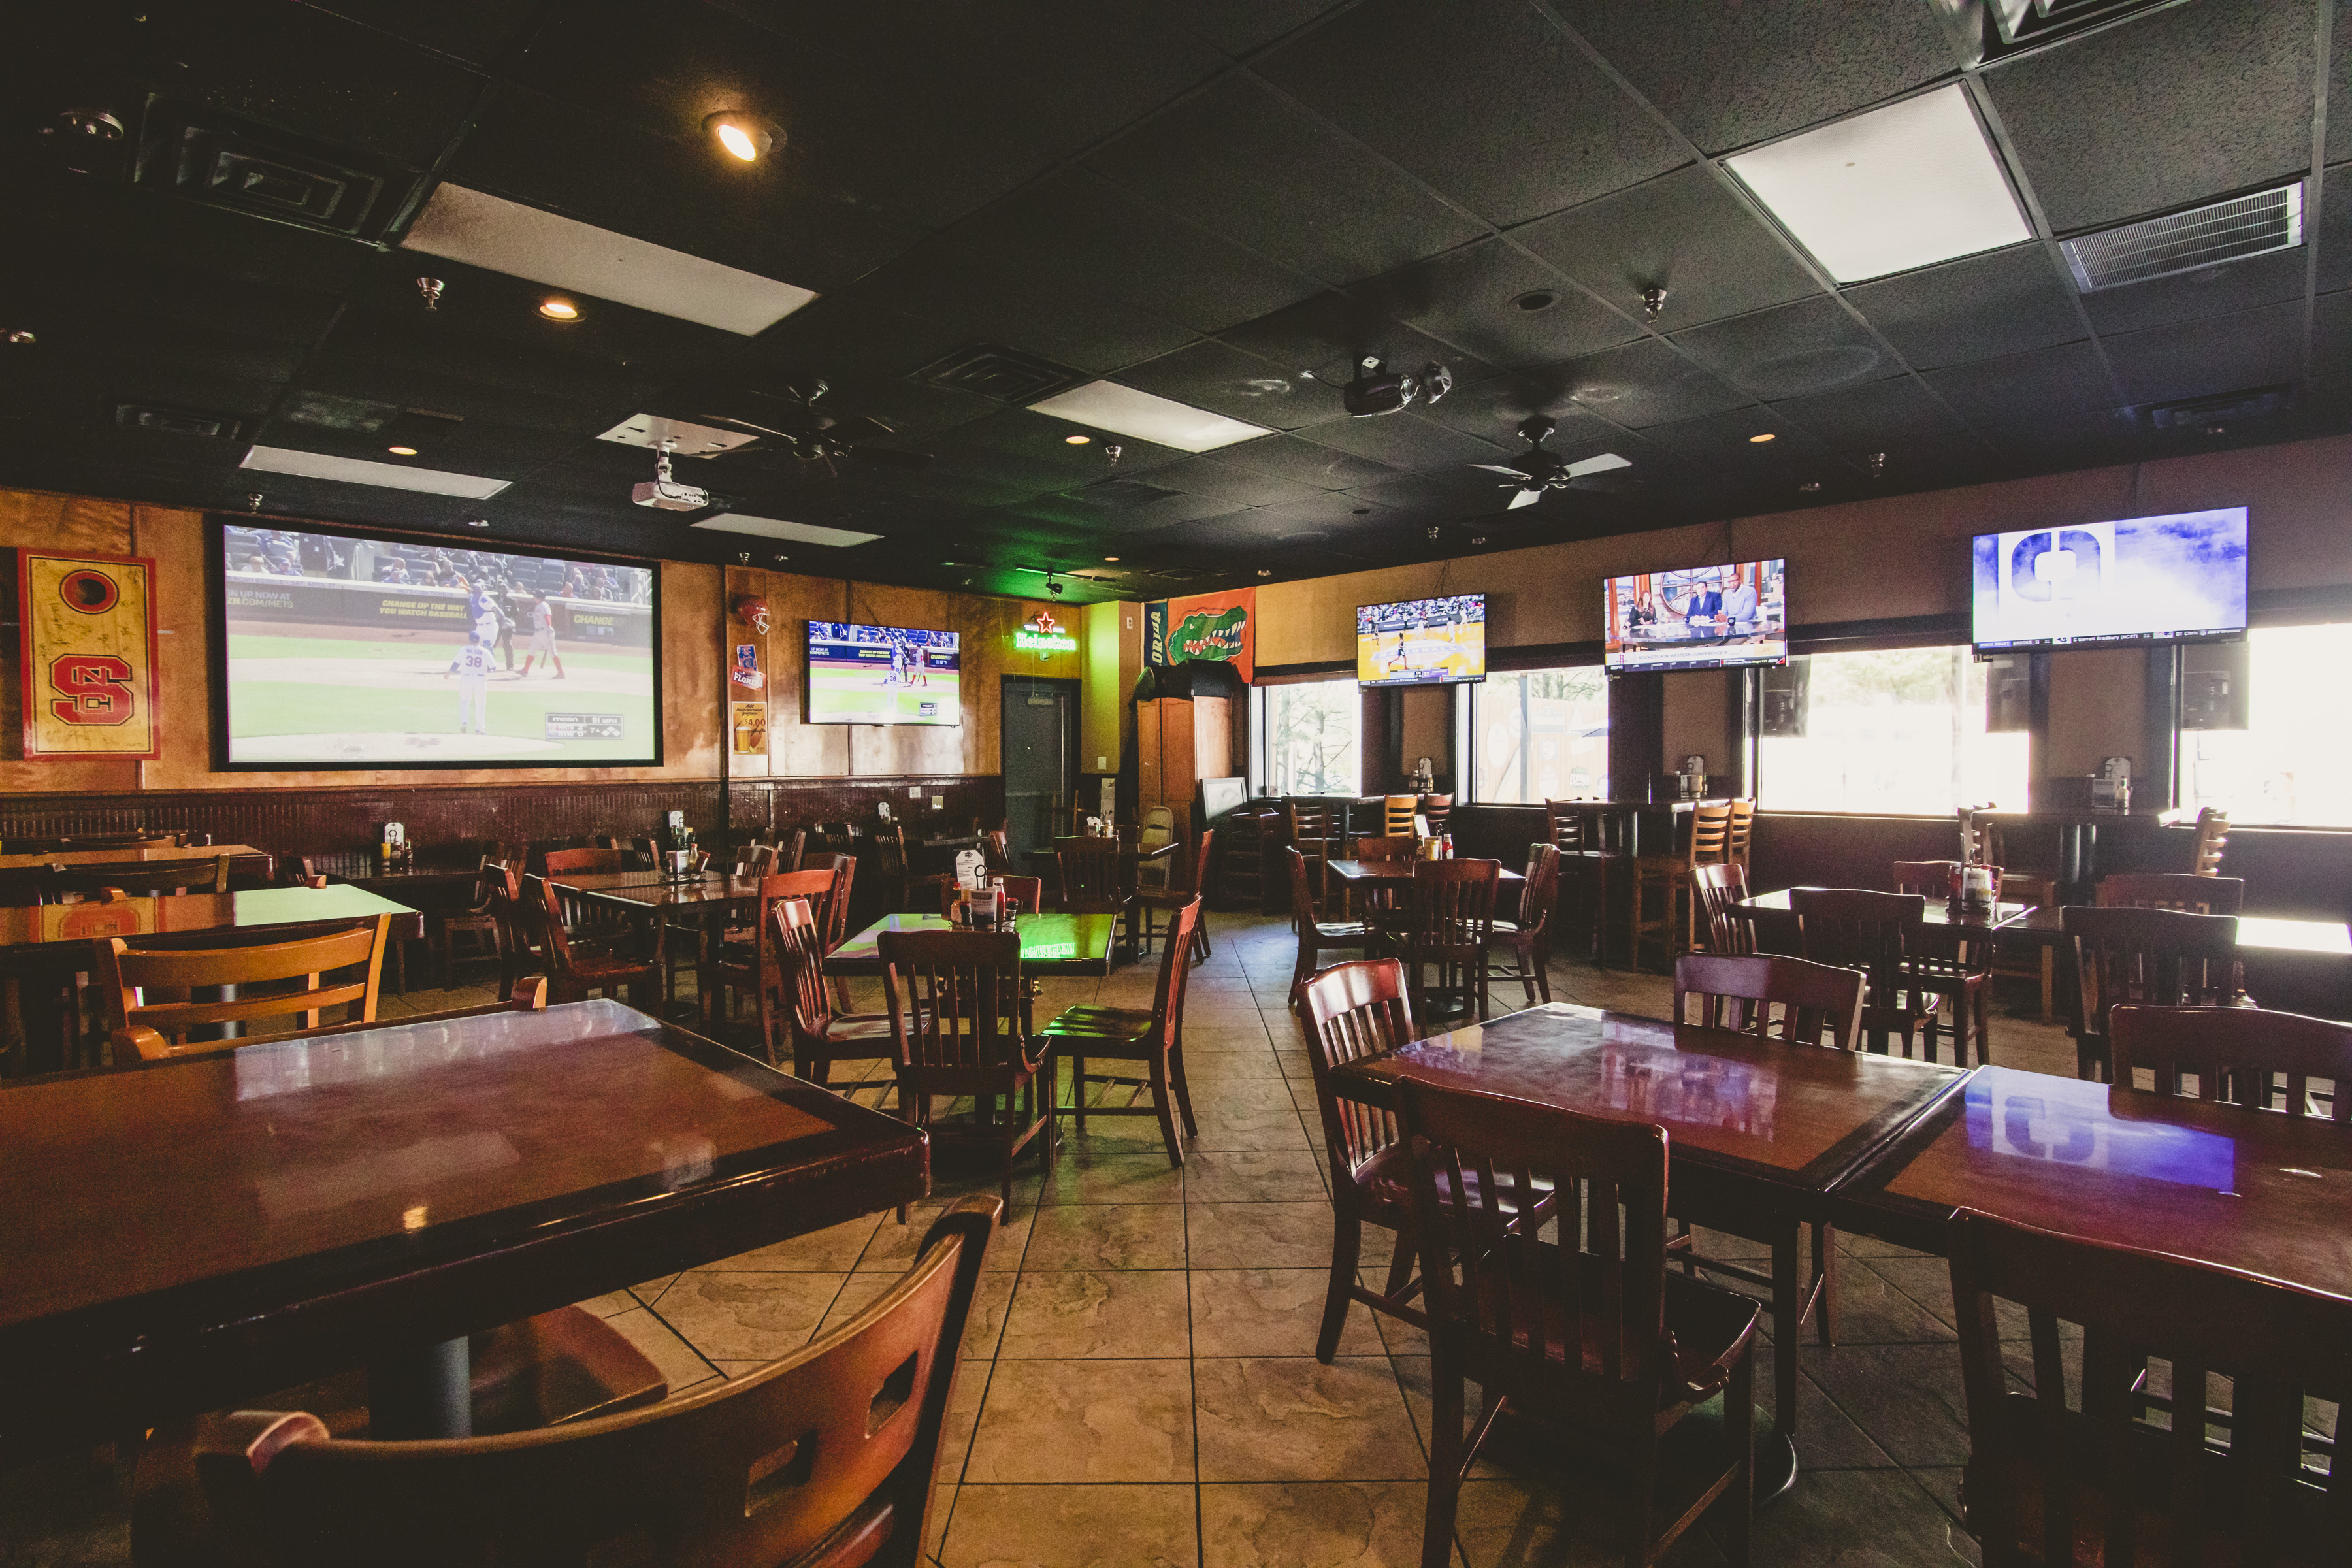 RallyPoint Sport Grill - Cary, NC - The place to catch sports action and enjoy great food and drinks!